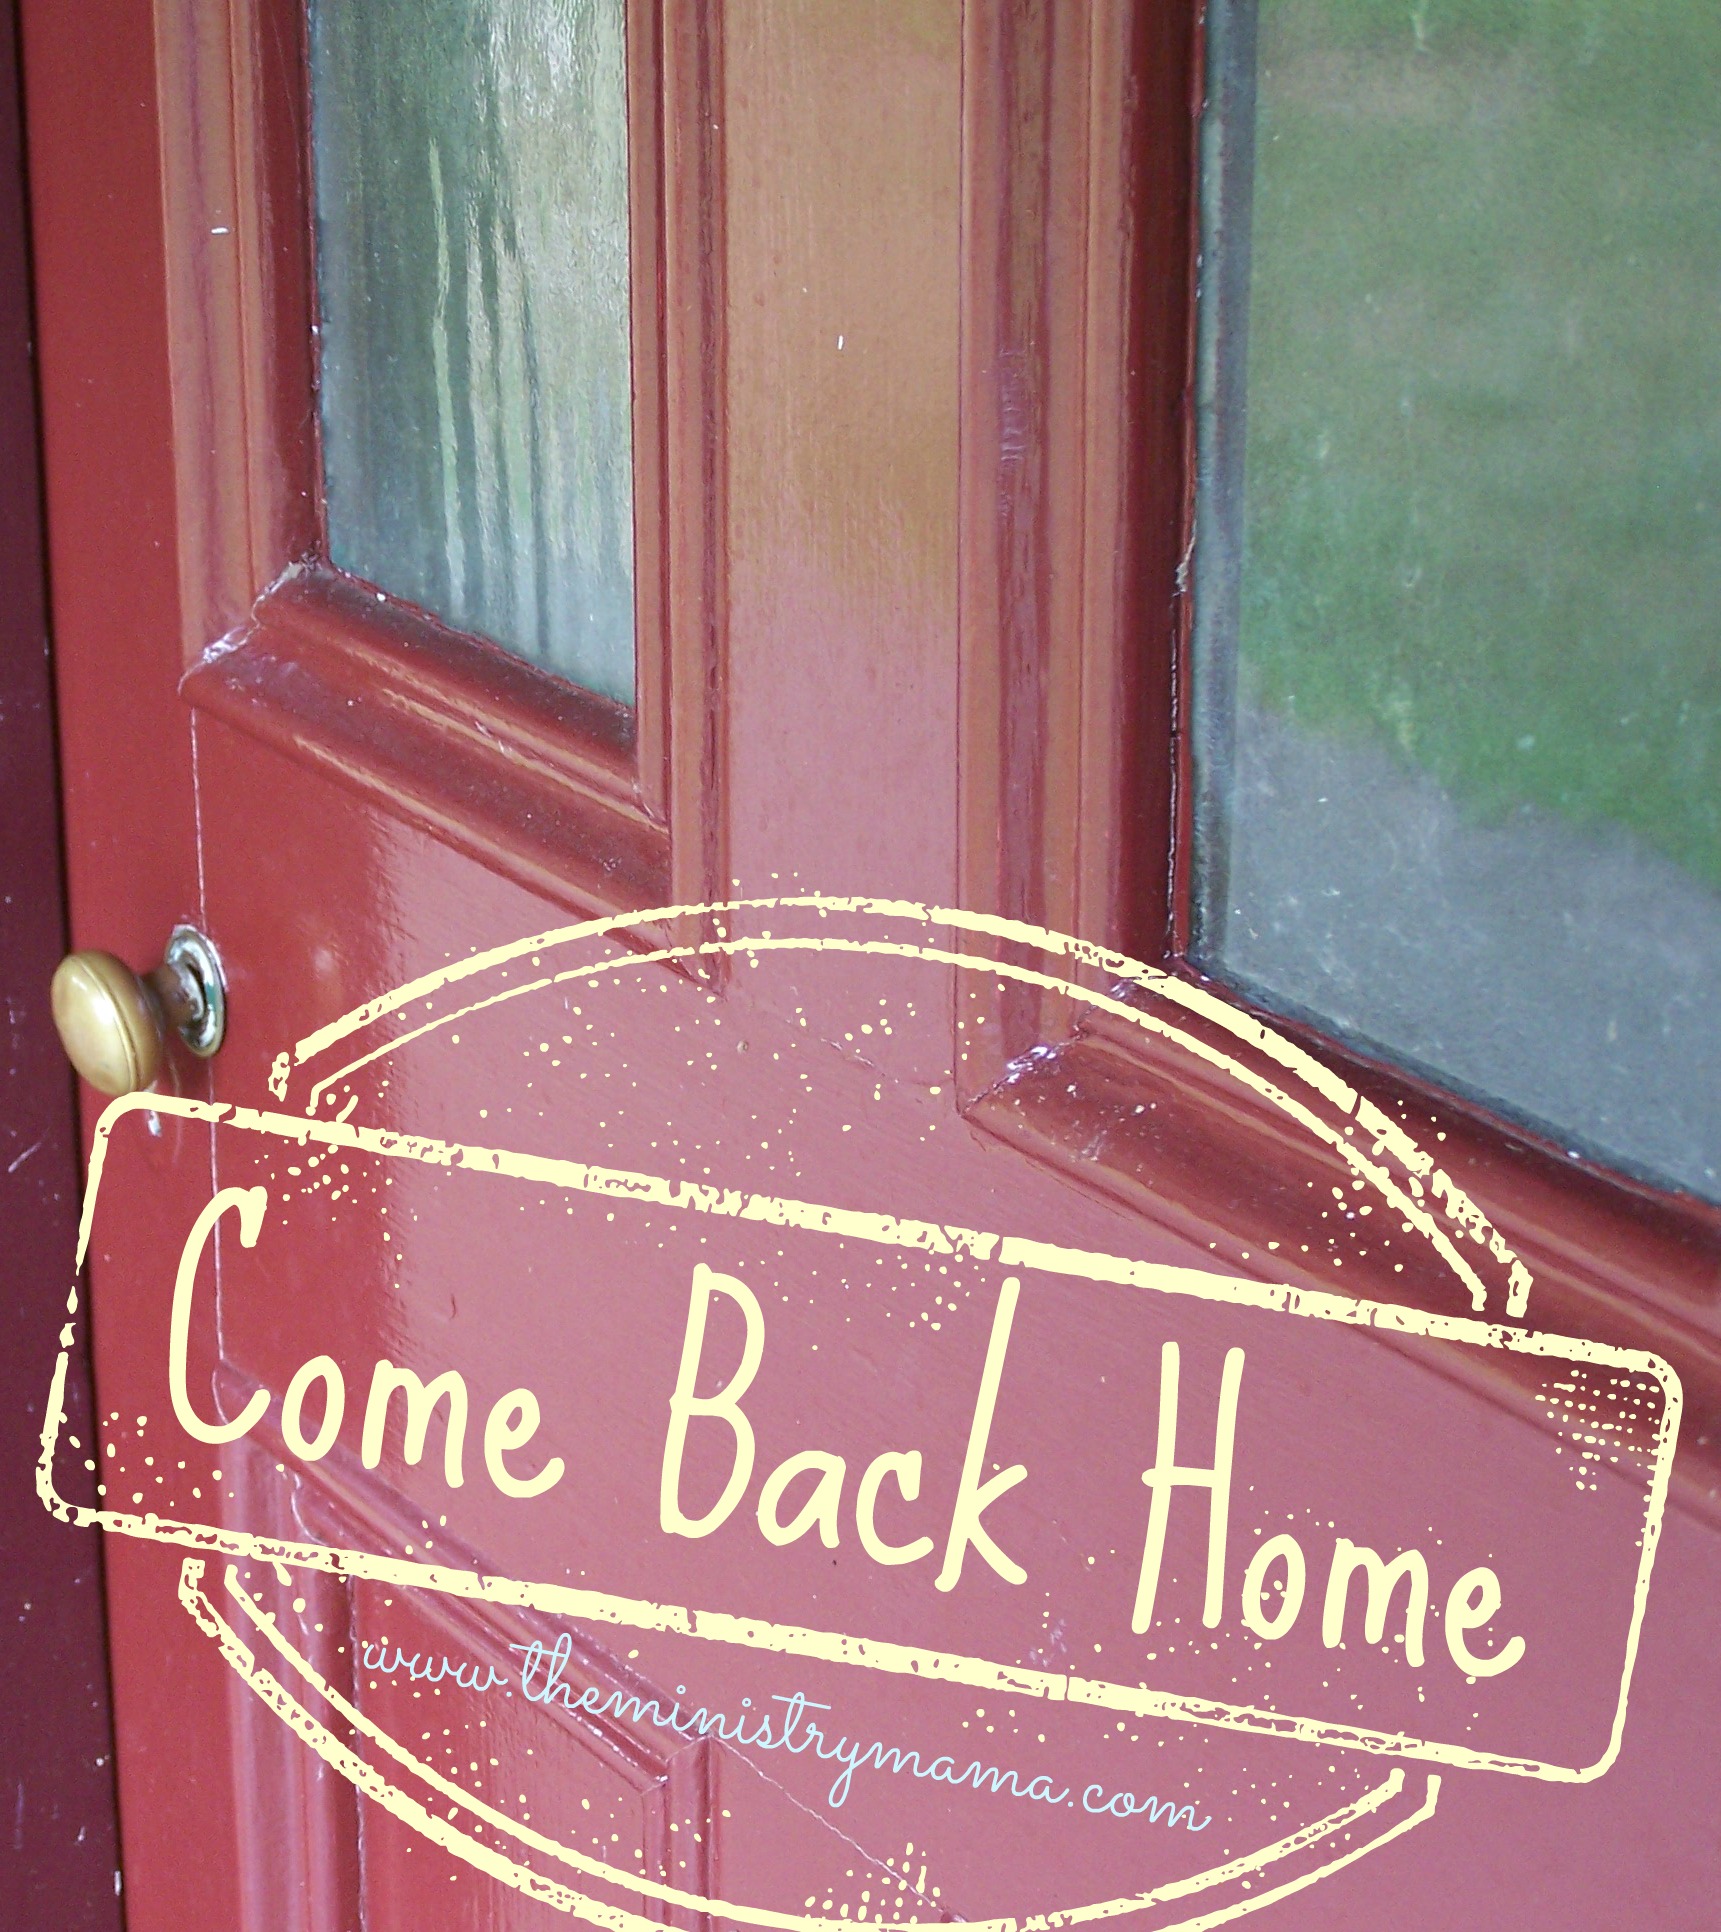 Backing home. Come back Home. Come back фото. Come back Home Постер. Coming back Home.